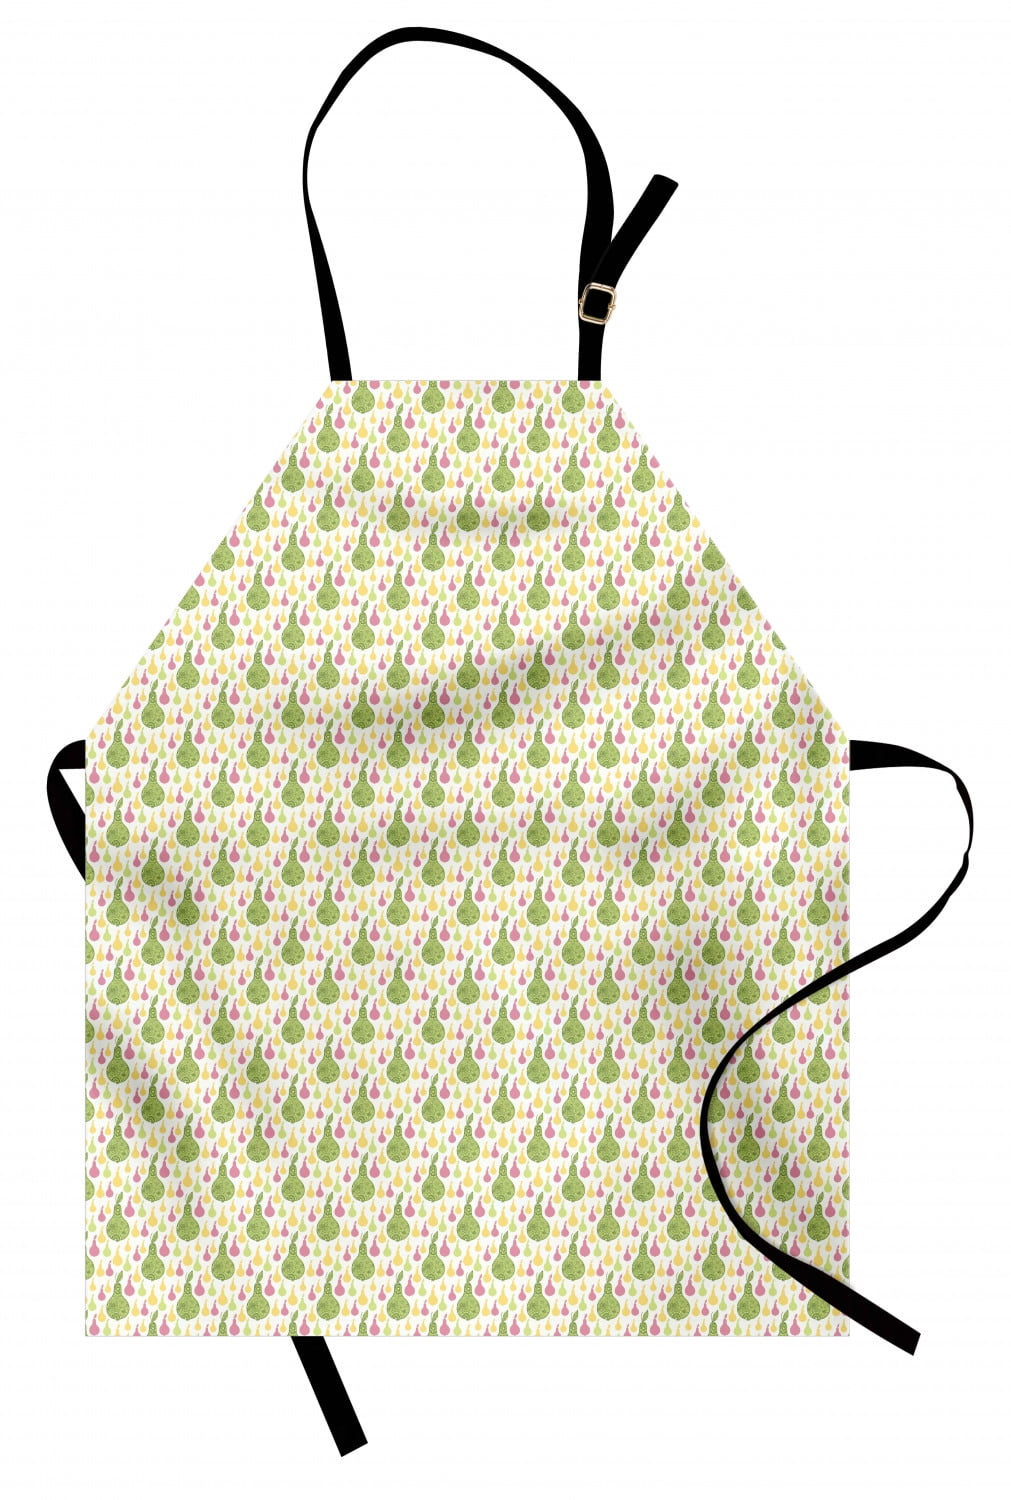 Details about   Unisex Standard Size Apron with Adjustable Neck Strap for Gardening Ambesonne 